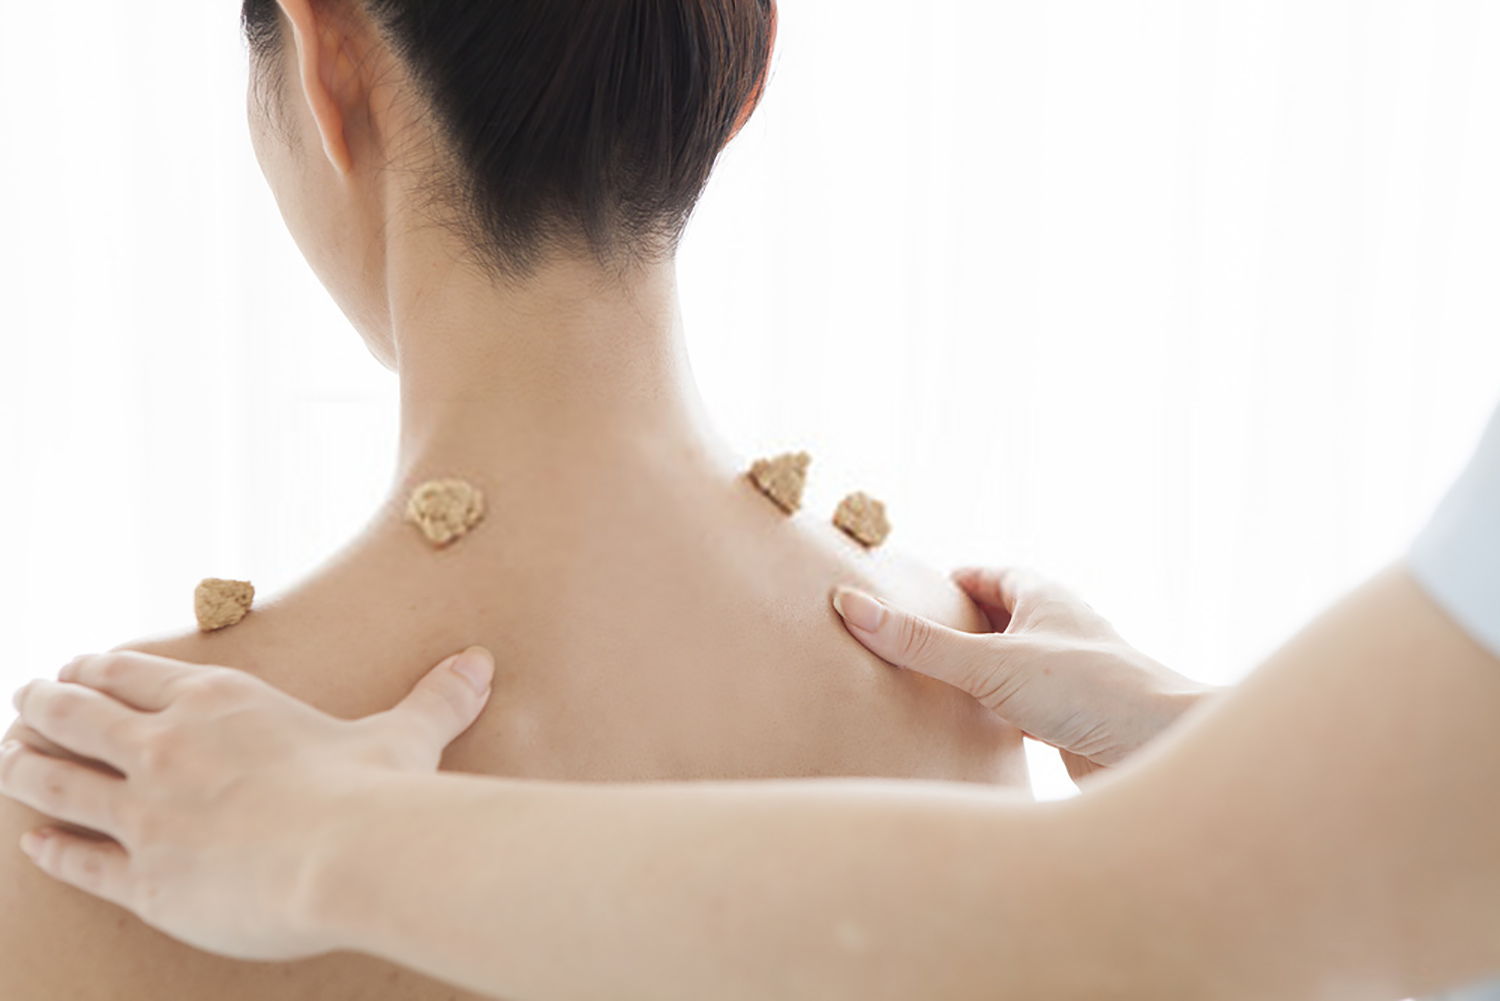 Moxibustion and Acupuncture for Stress Relief in Tao Acupuncture - AtoAllinks